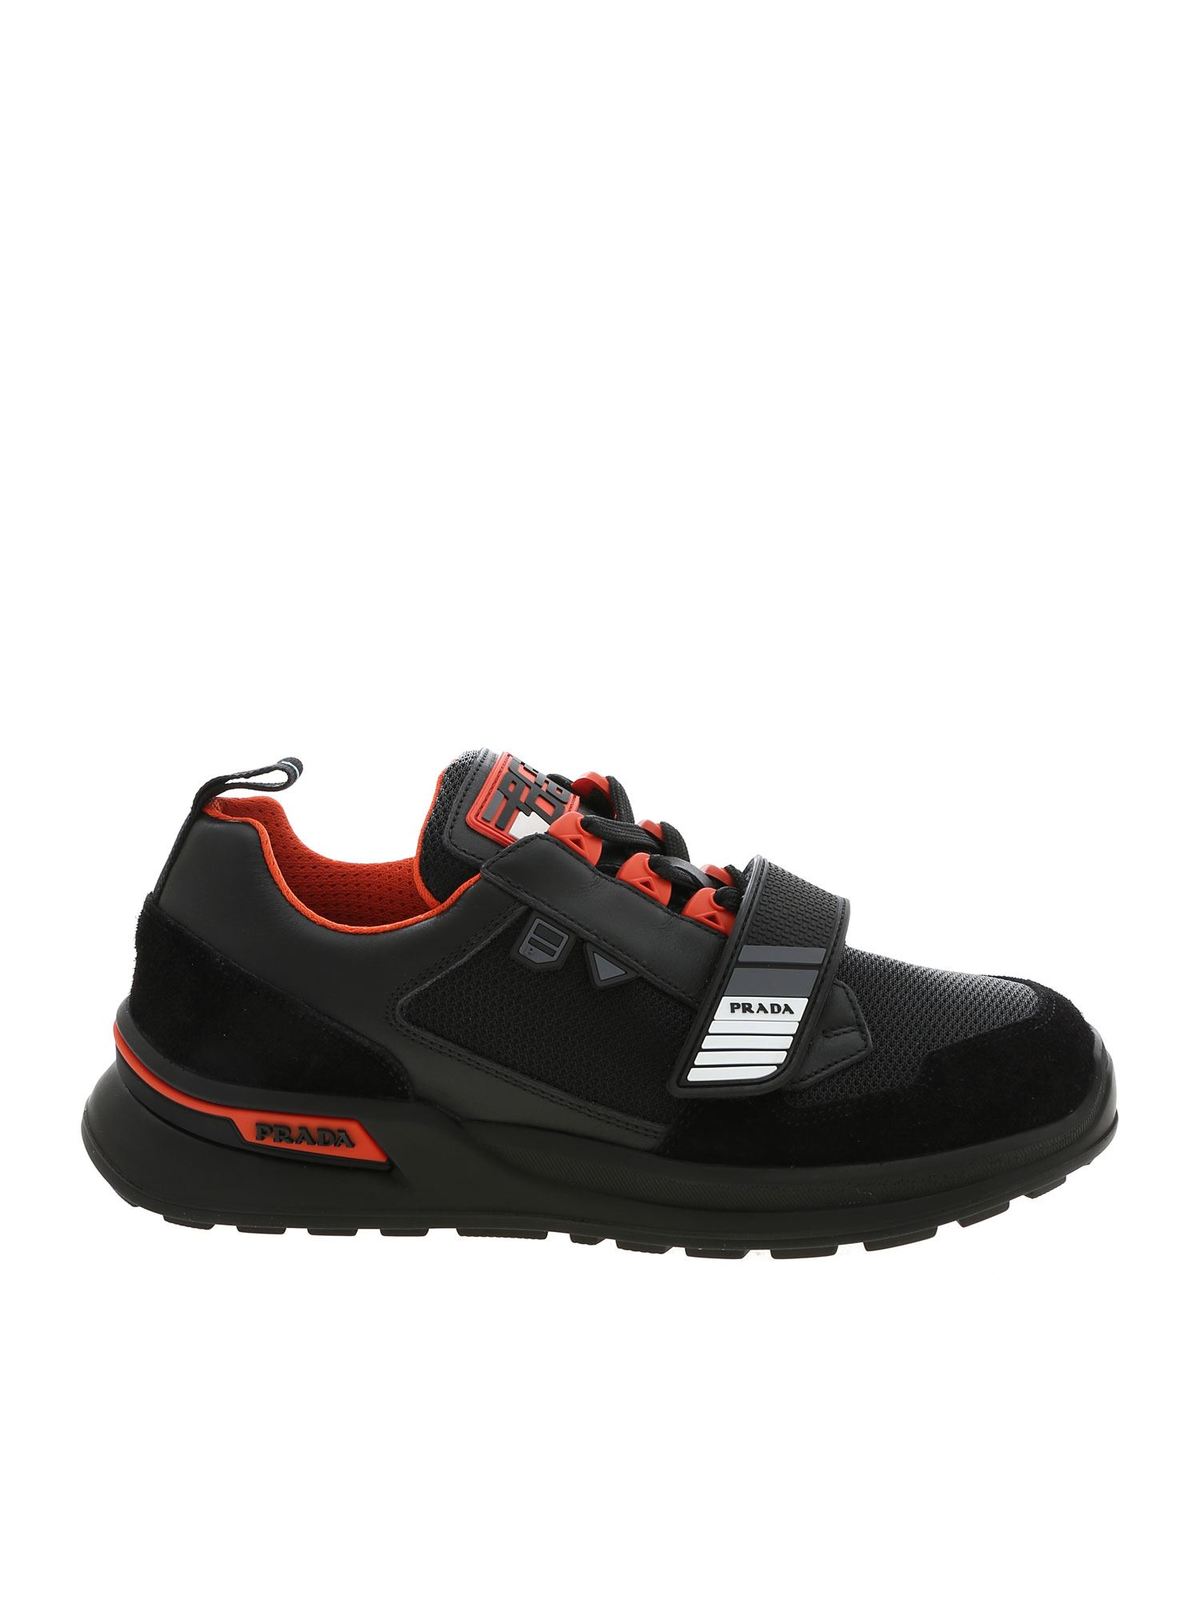 PRADA MECHANO trainers IN BLACK LEATHER AND FABRIC